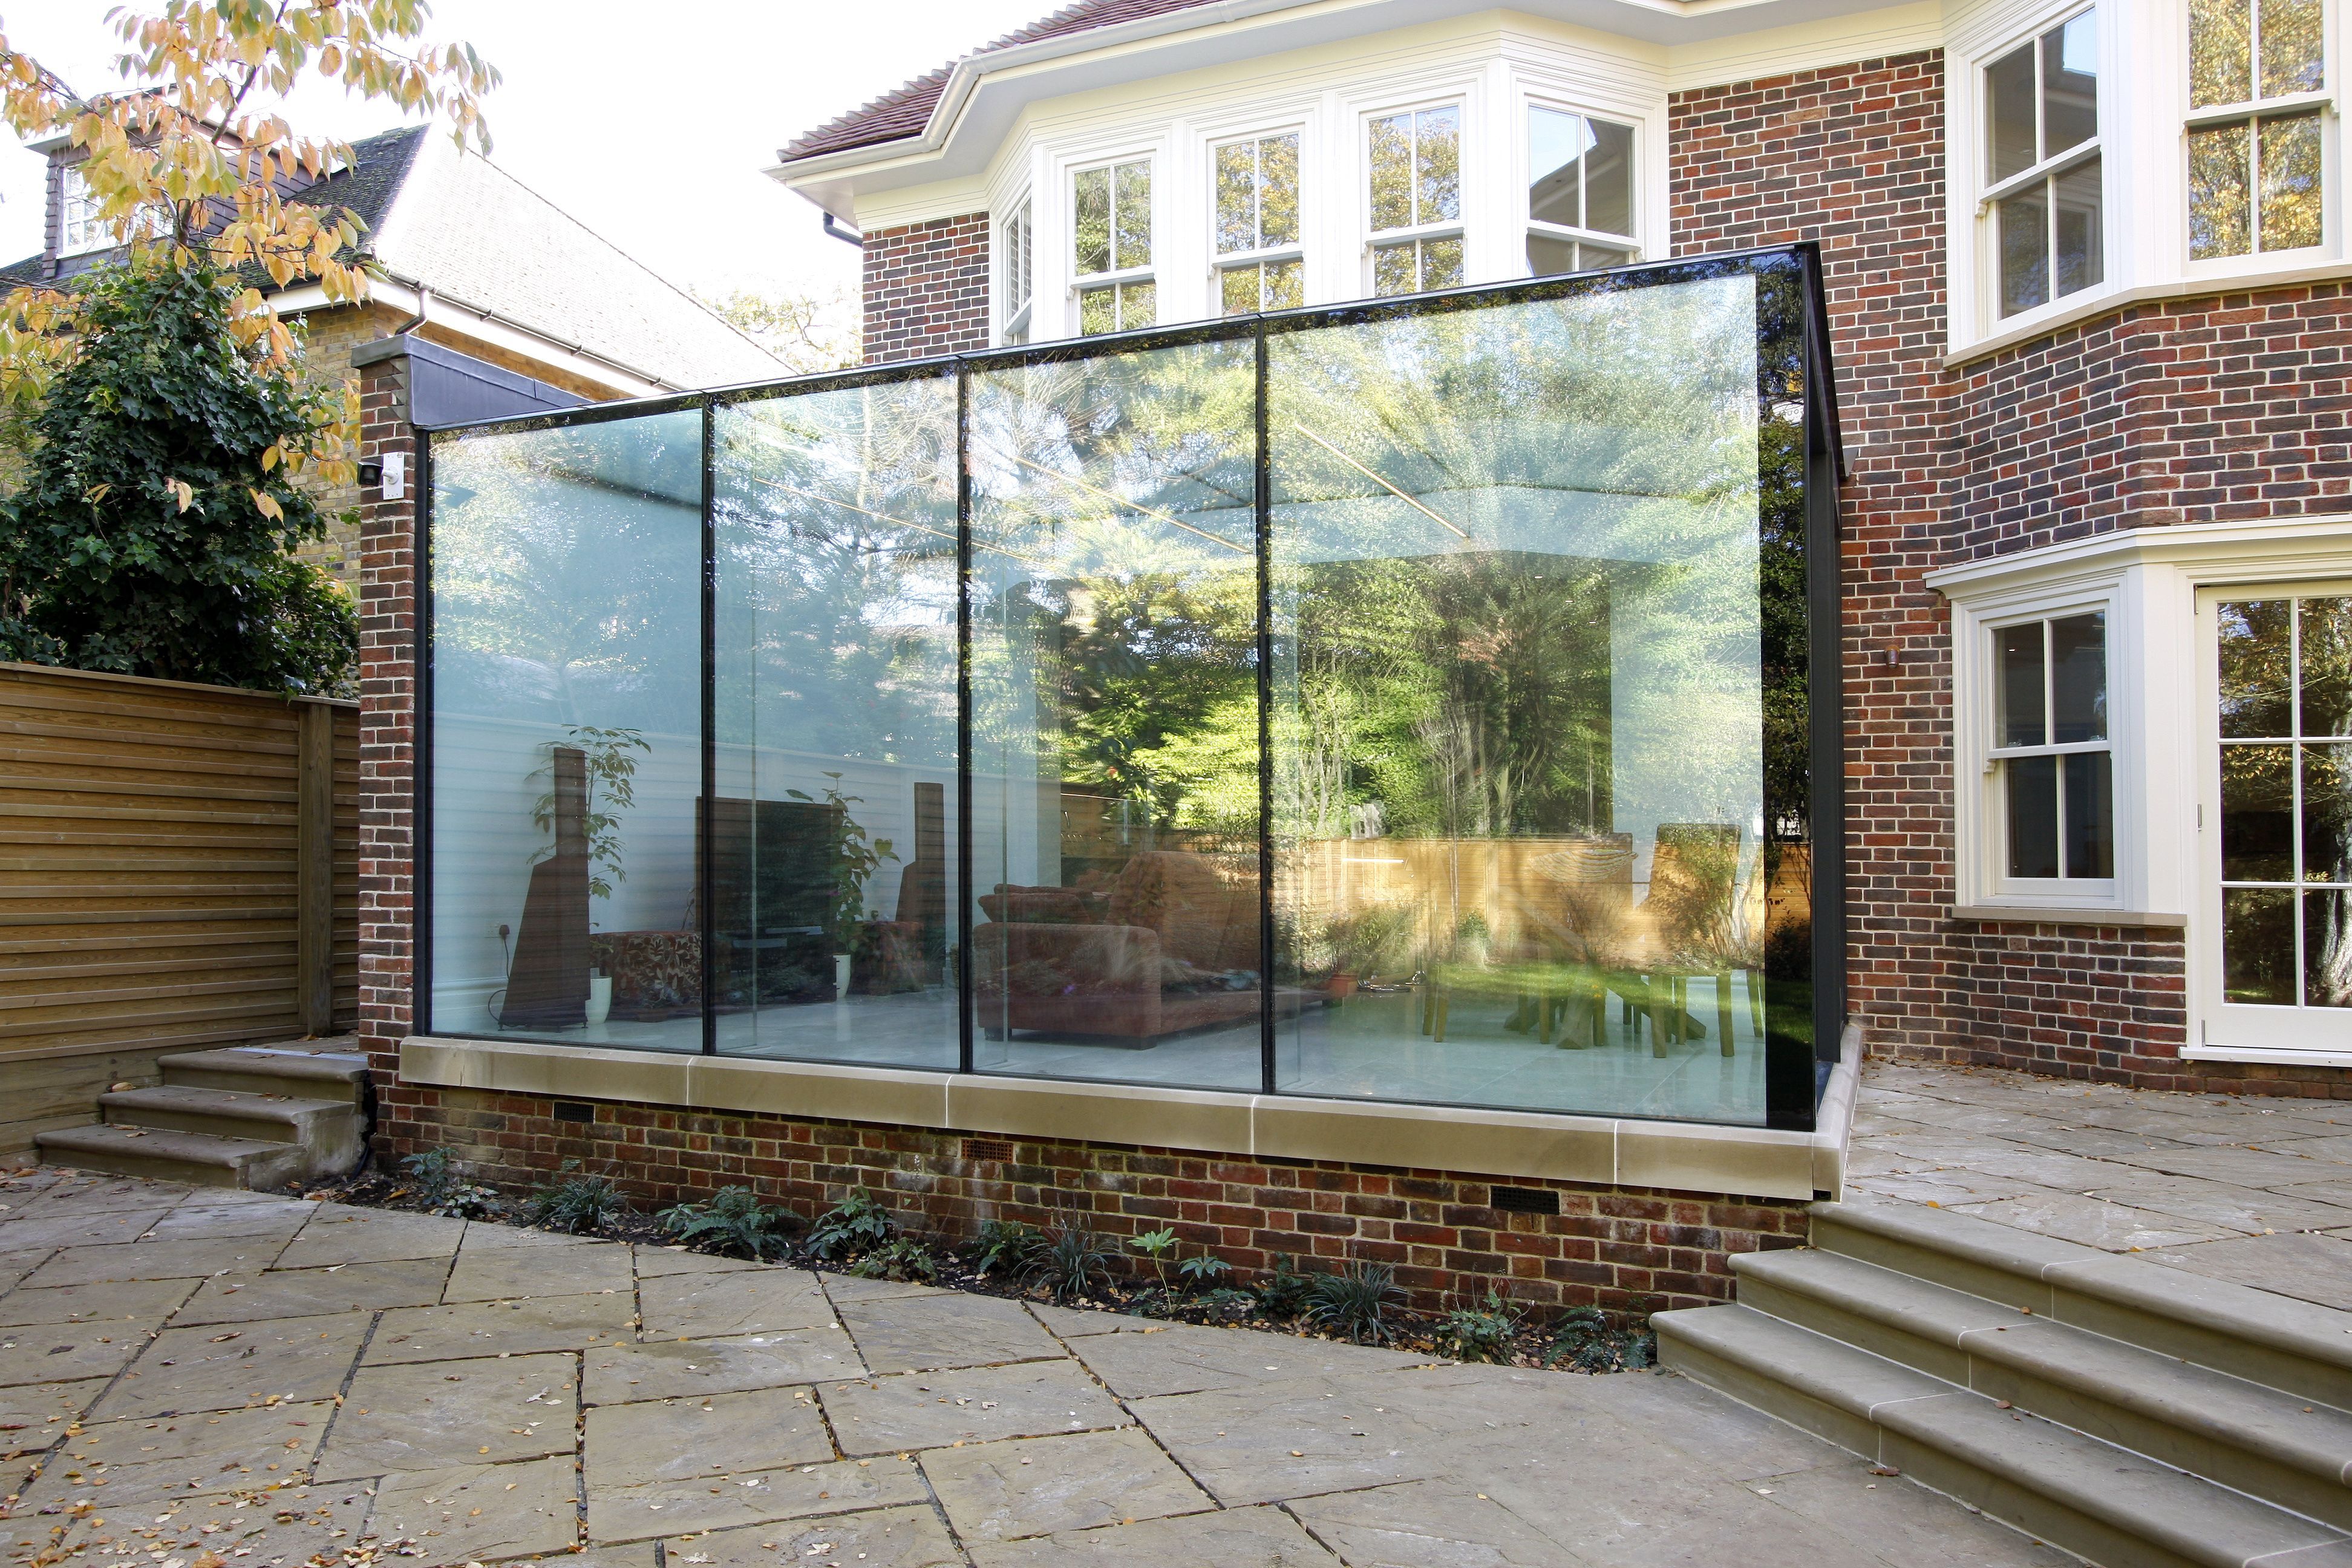 external view of the frameless glass box extension showing silicone joints  www.iqglassuk.com